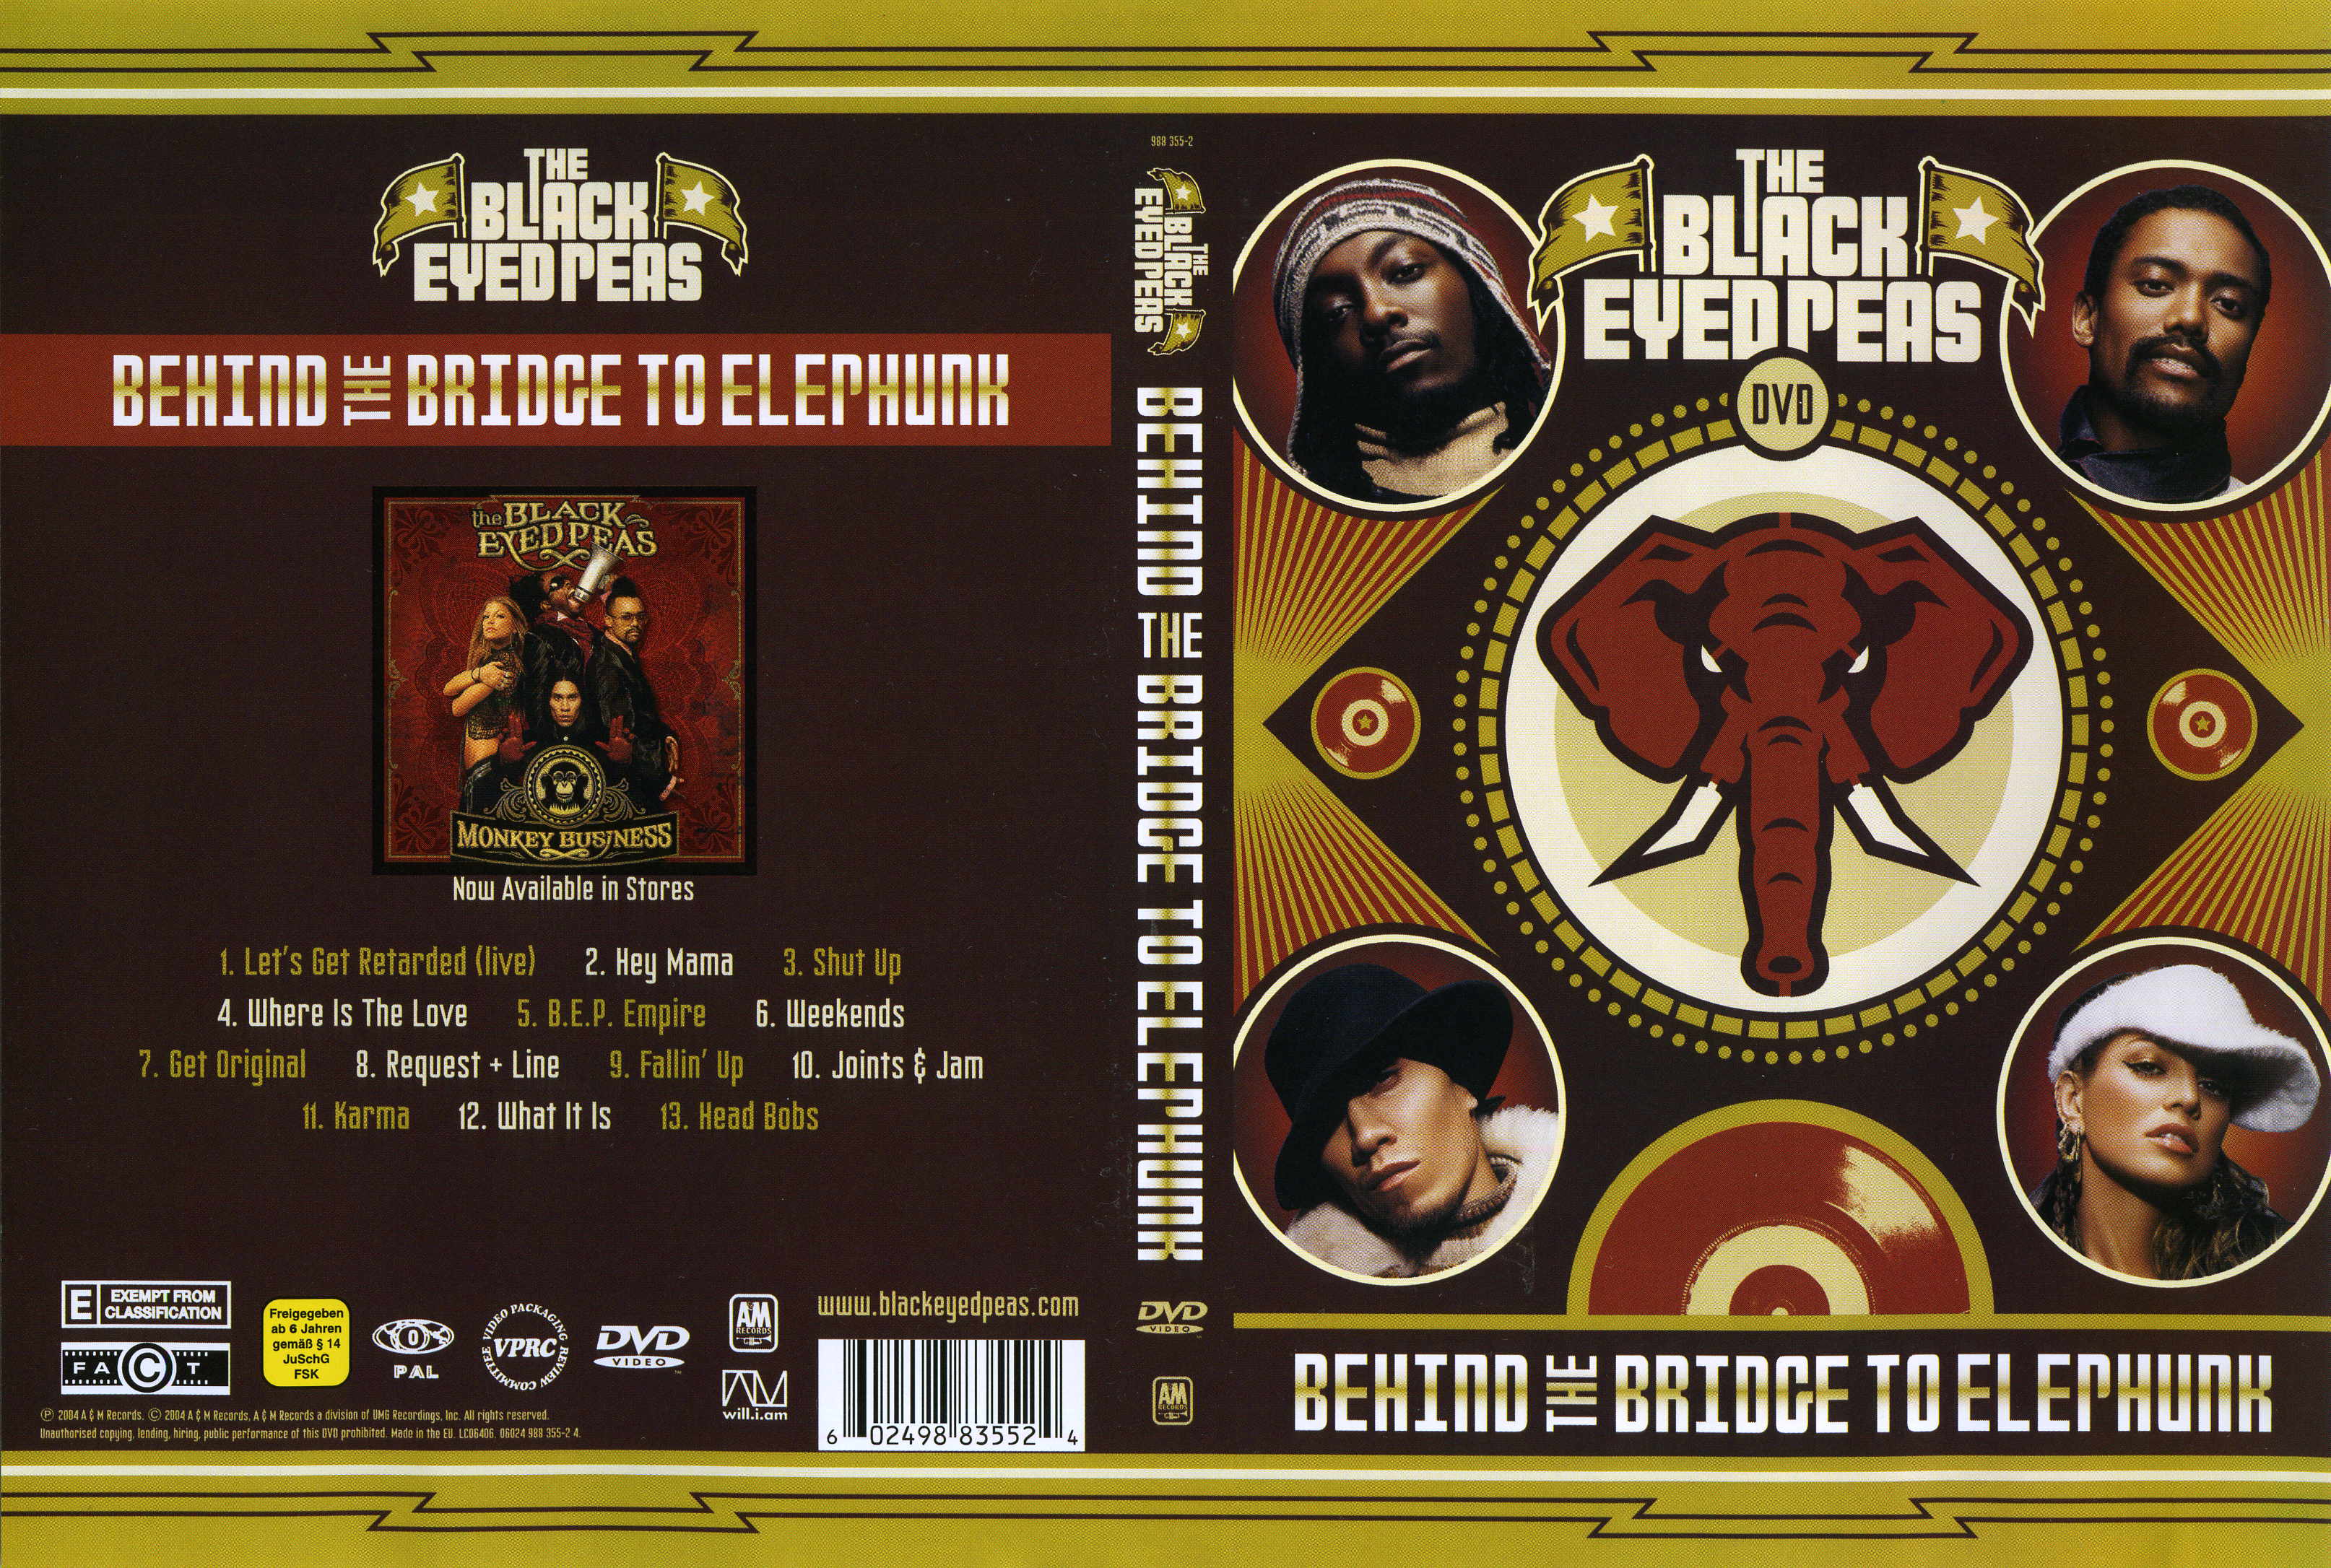 Jaquette DVD The black eyed peas - Behind the bridge to elephunk